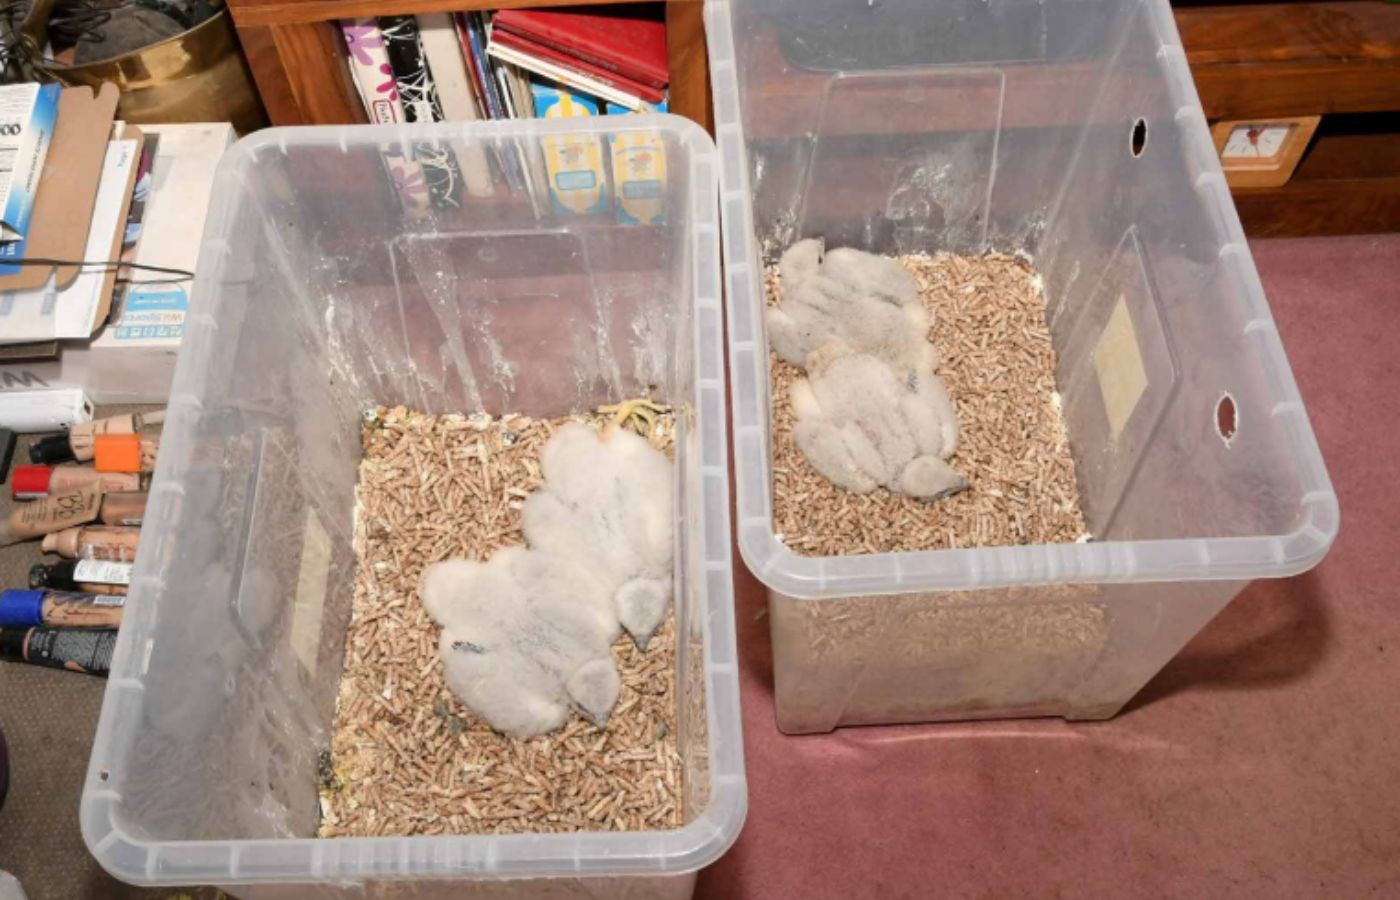 A number of chicks were found in Timothy Hall's home.